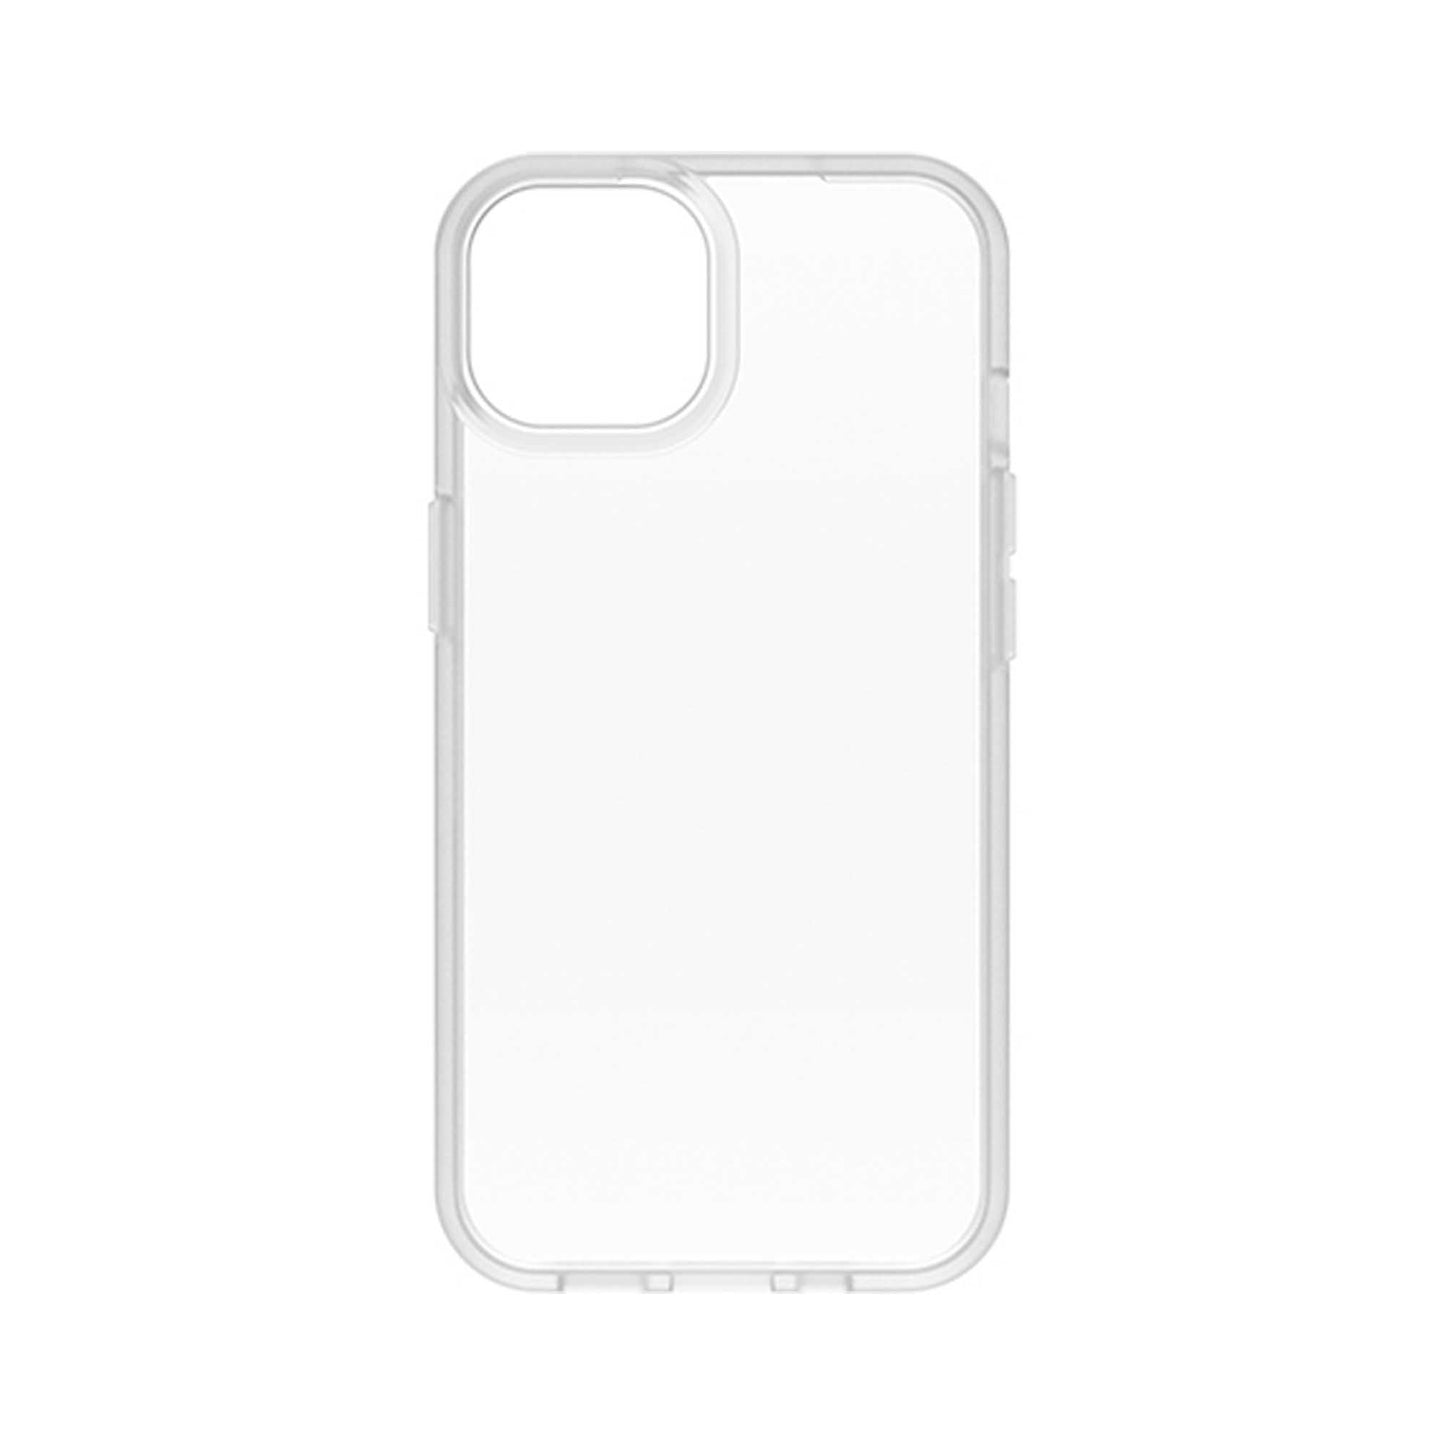 Otterbox React for iPhone 13 Mini 5.4" 5G - Clear (Barcode: 840104287194)